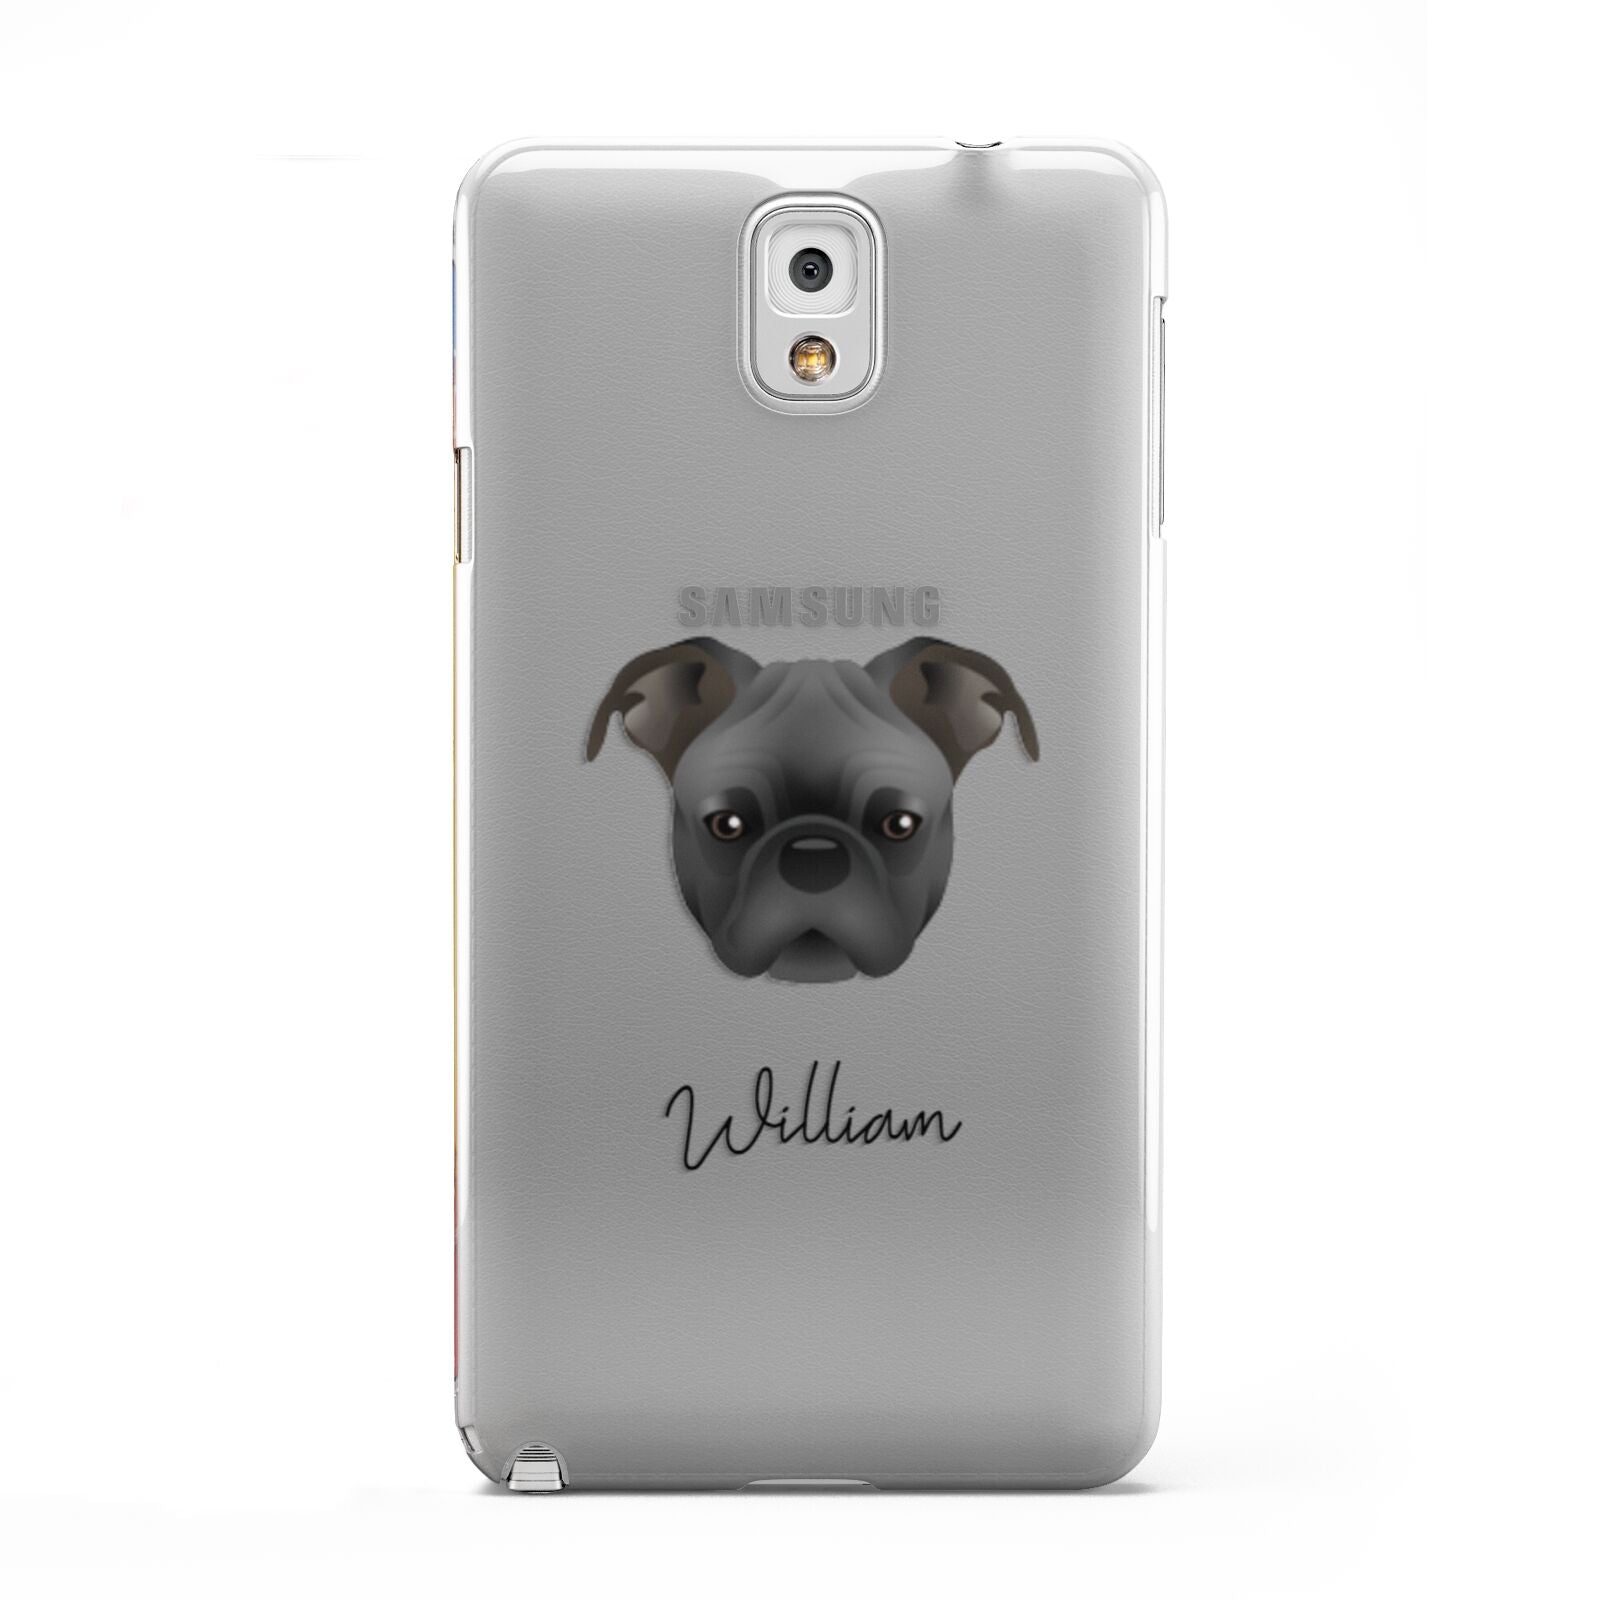 Bugg Personalised Samsung Galaxy Note 3 Case